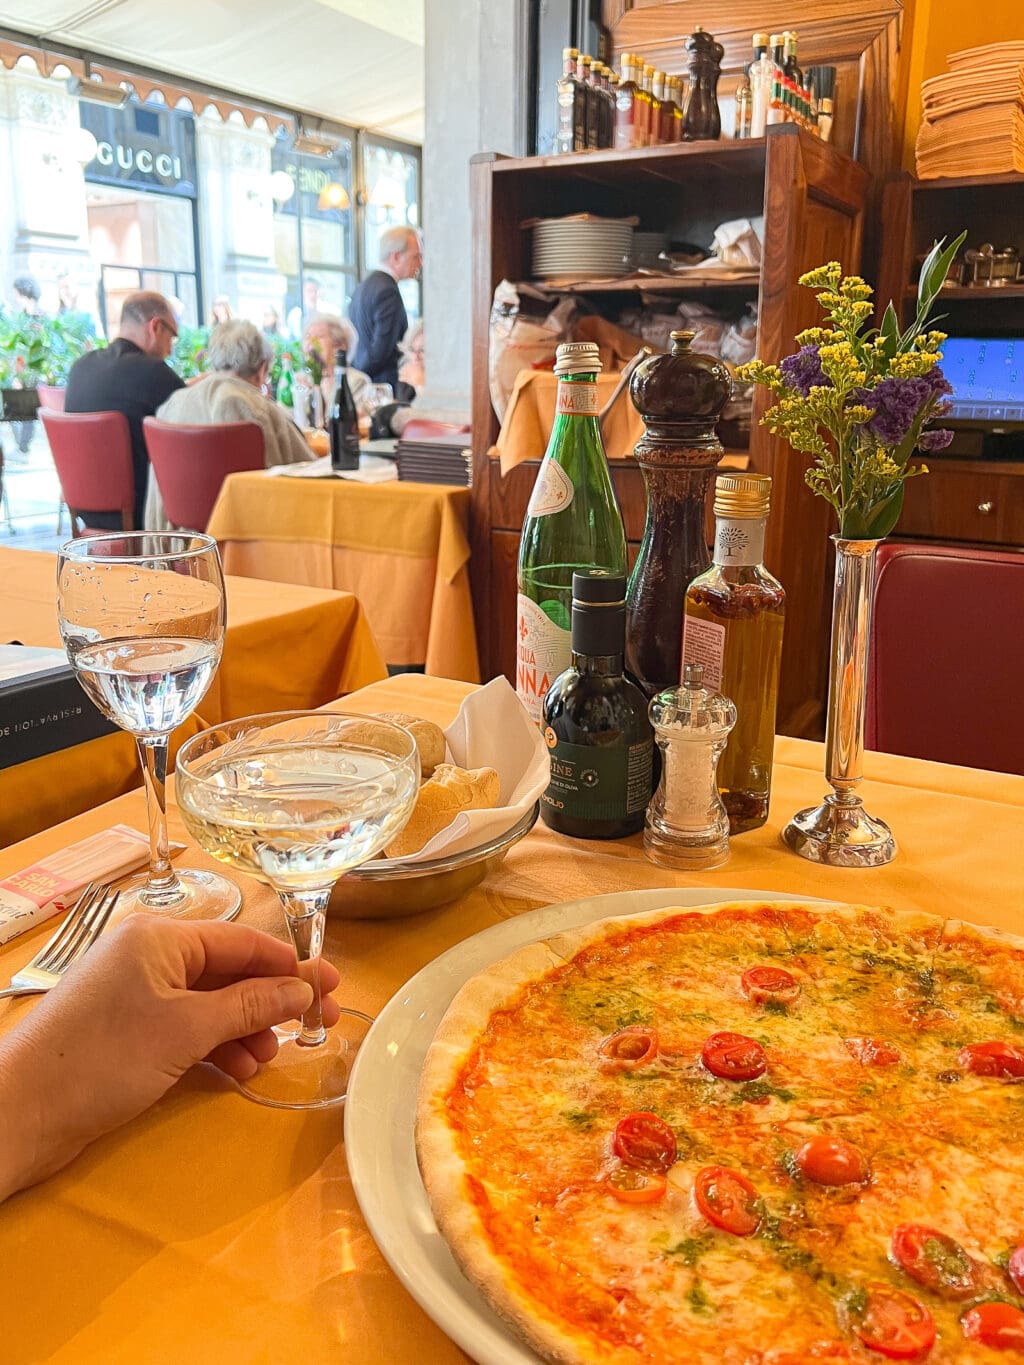 Champagne and pizza in Italy